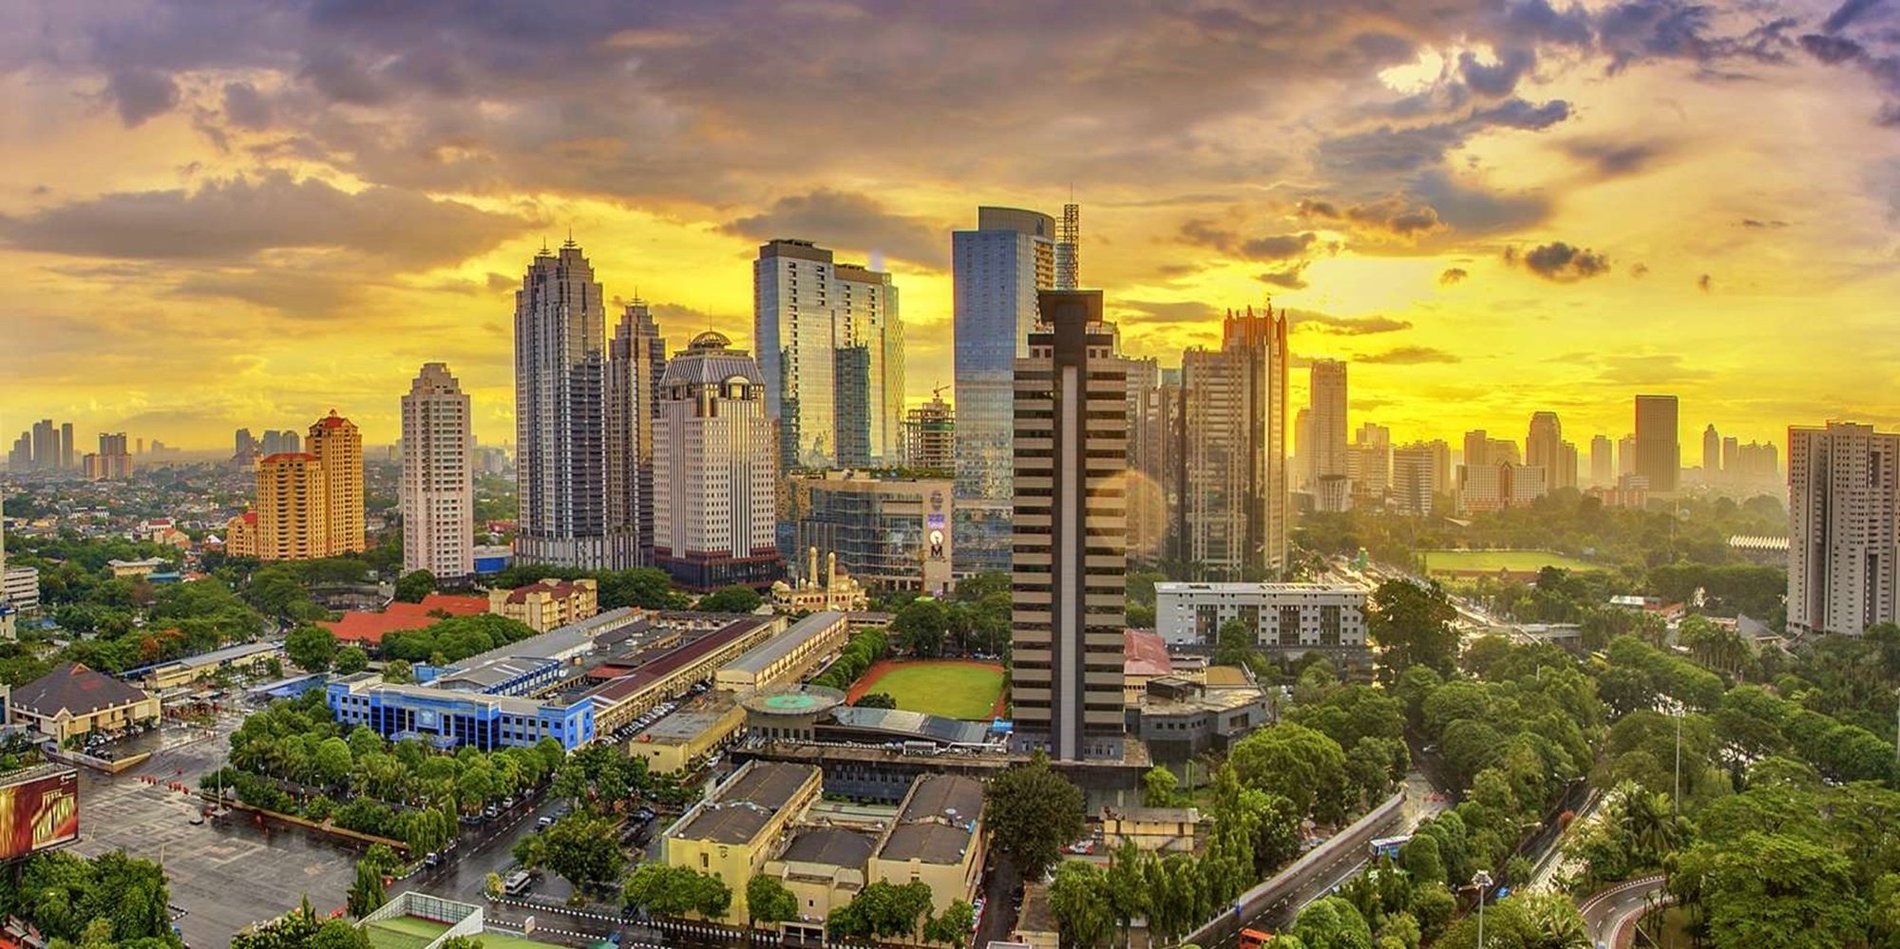 10 things to do in Jakarta